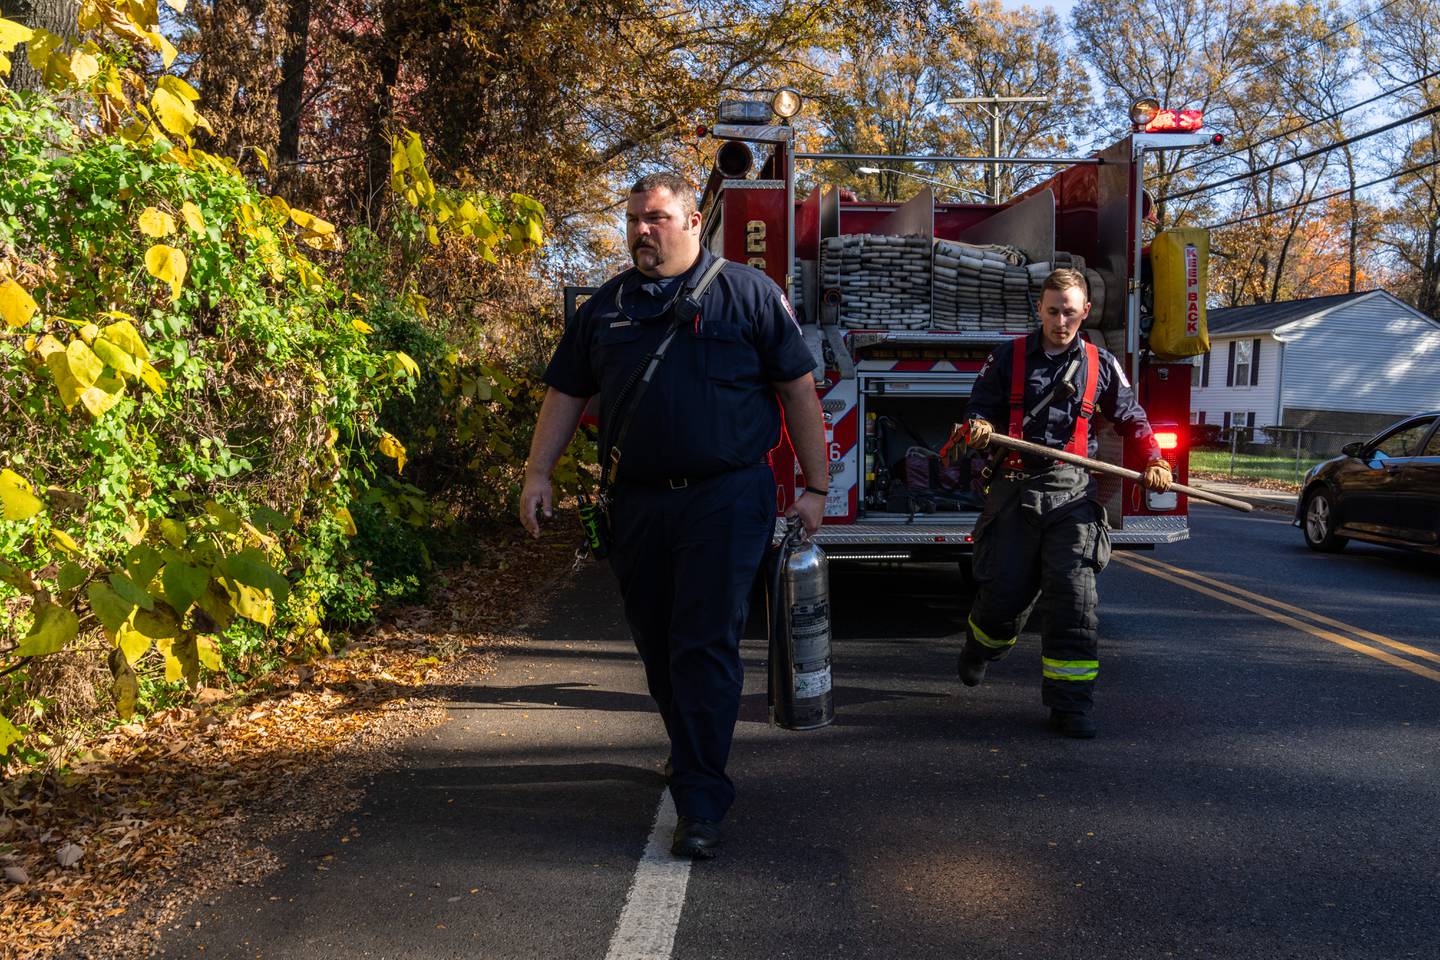 Prince George’s County firefighters Matt Fisher, left, and Jacob Smith bring out equipment to extinguish a smoldering piece of wood in the woods in District Heights, Md. on Tuesday, Nov. 14, 2023.